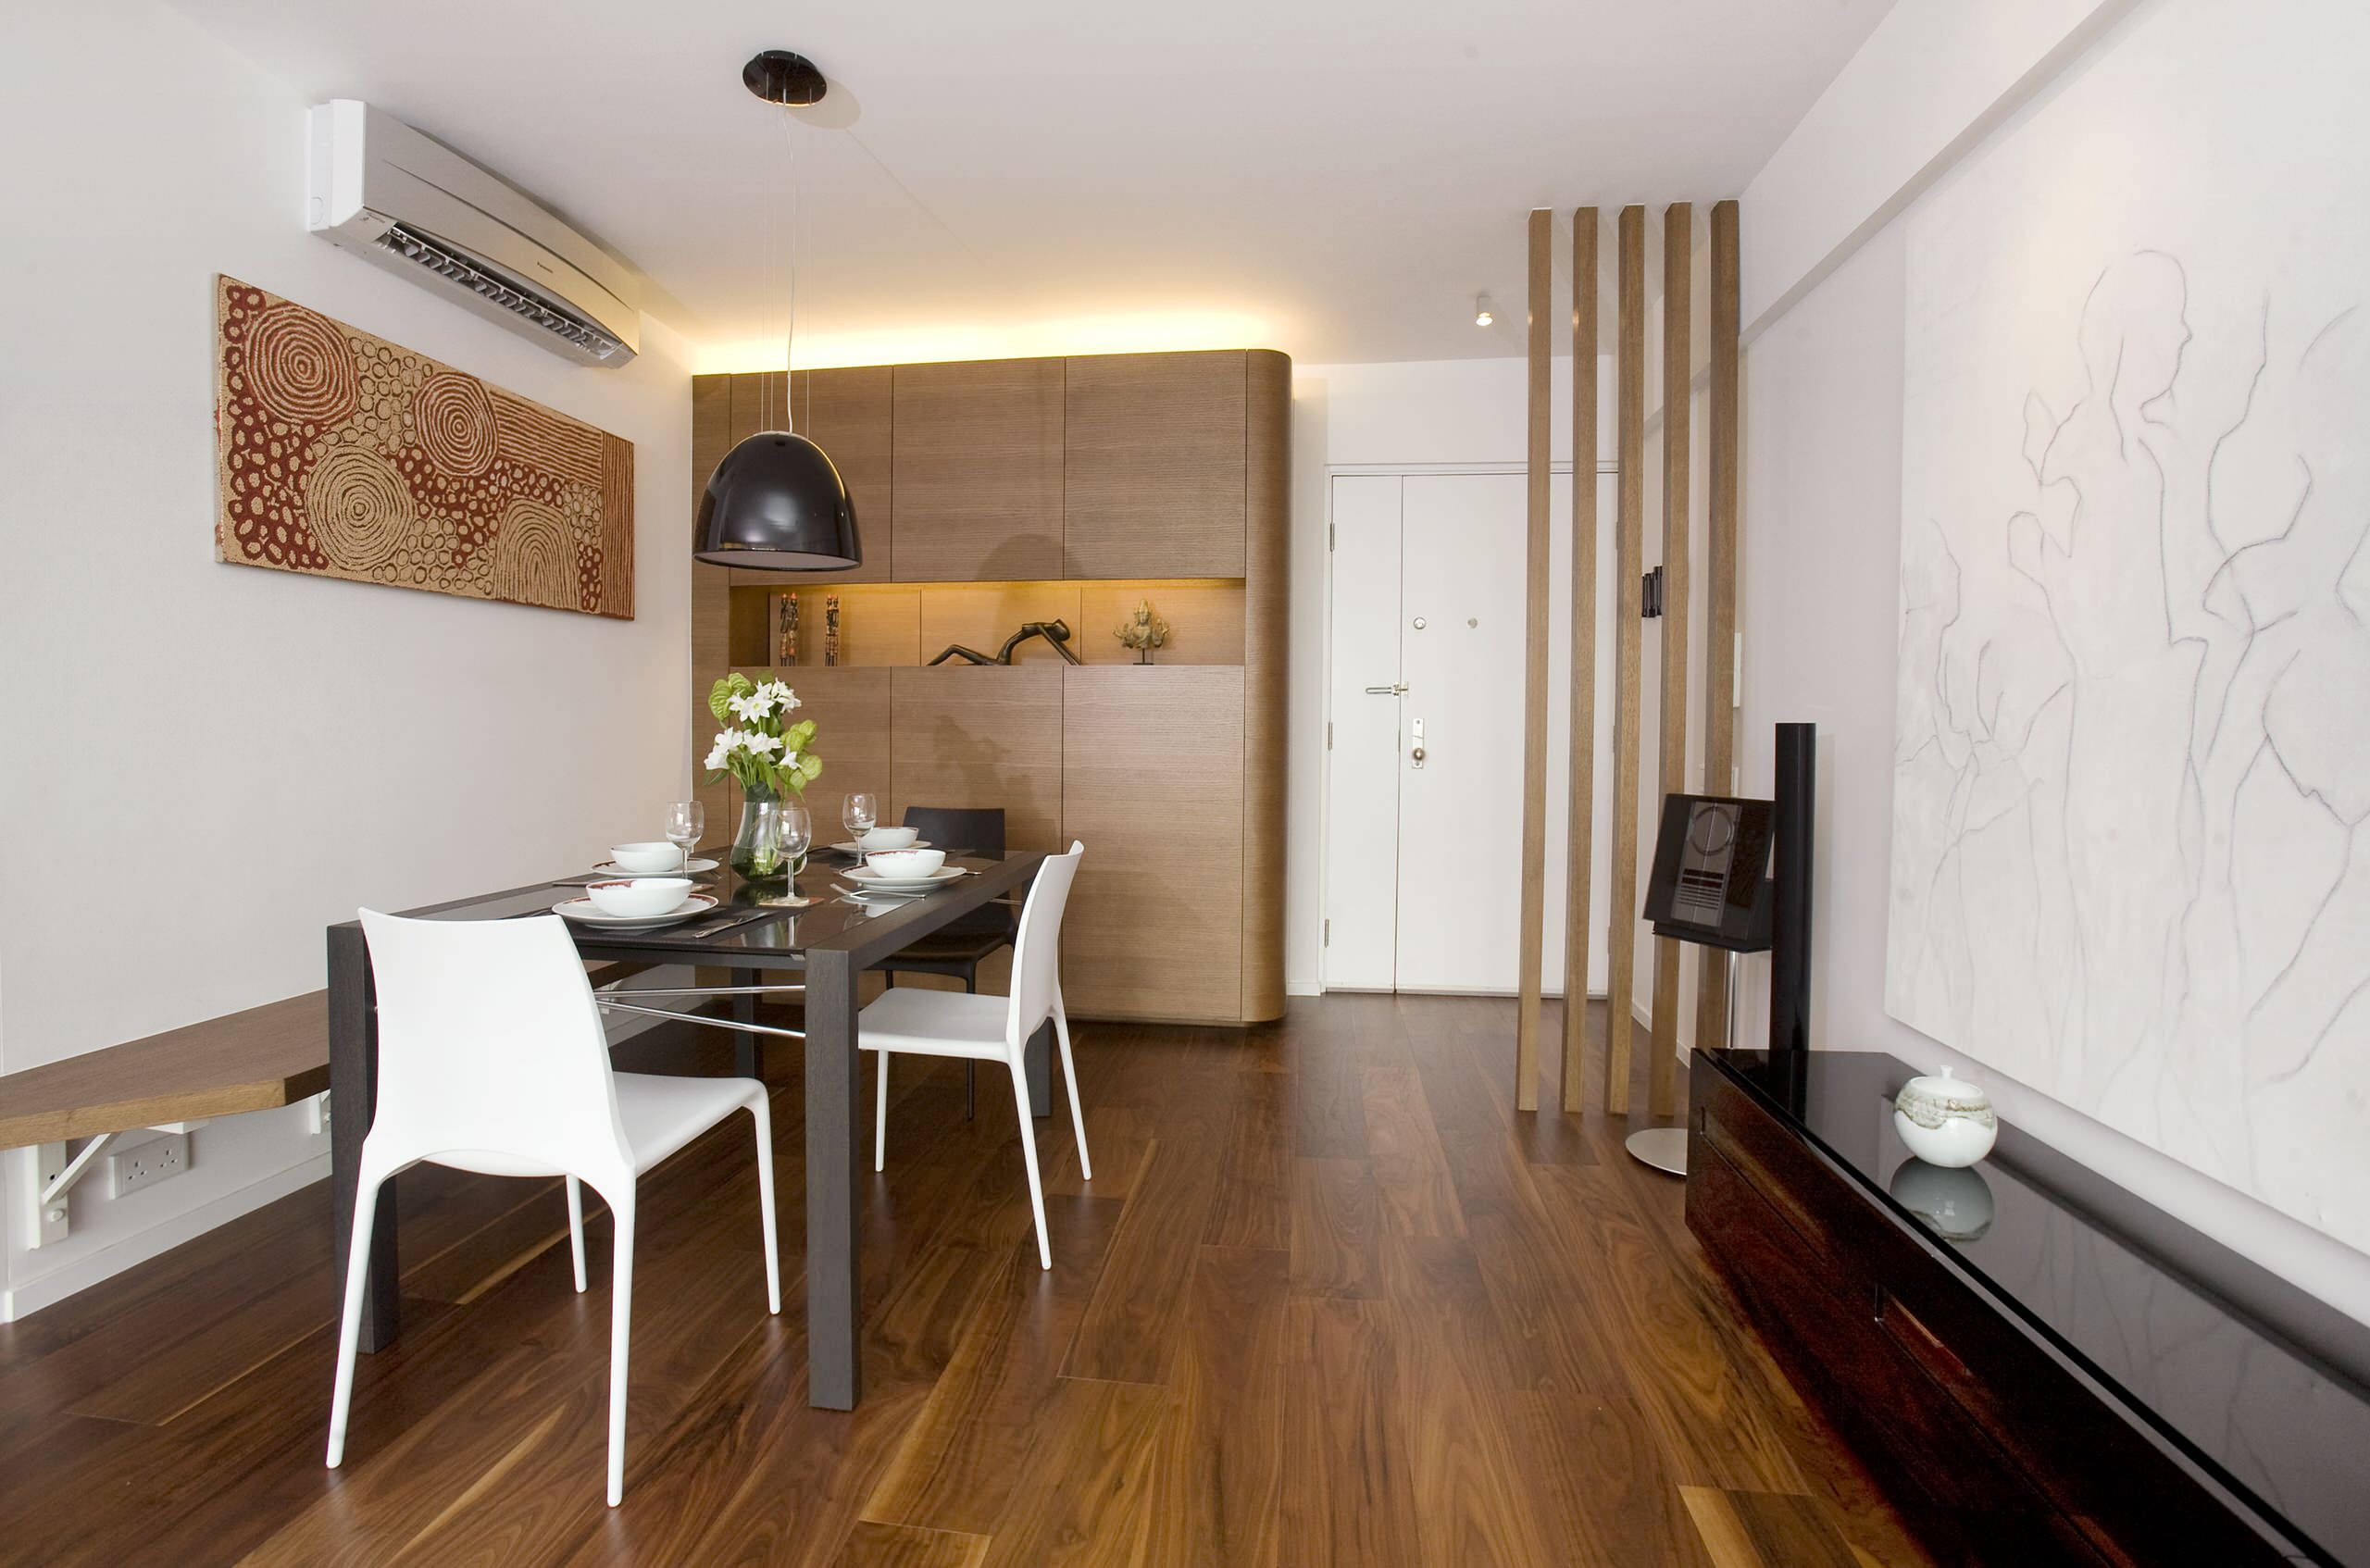 One Robinson Place - Minimalistic Design with an Artistic Touch -  Contemporary - Dining Room - Hong Kong - by Clifton Leung Design Workshop -  CLDW.com.hk | Houzz